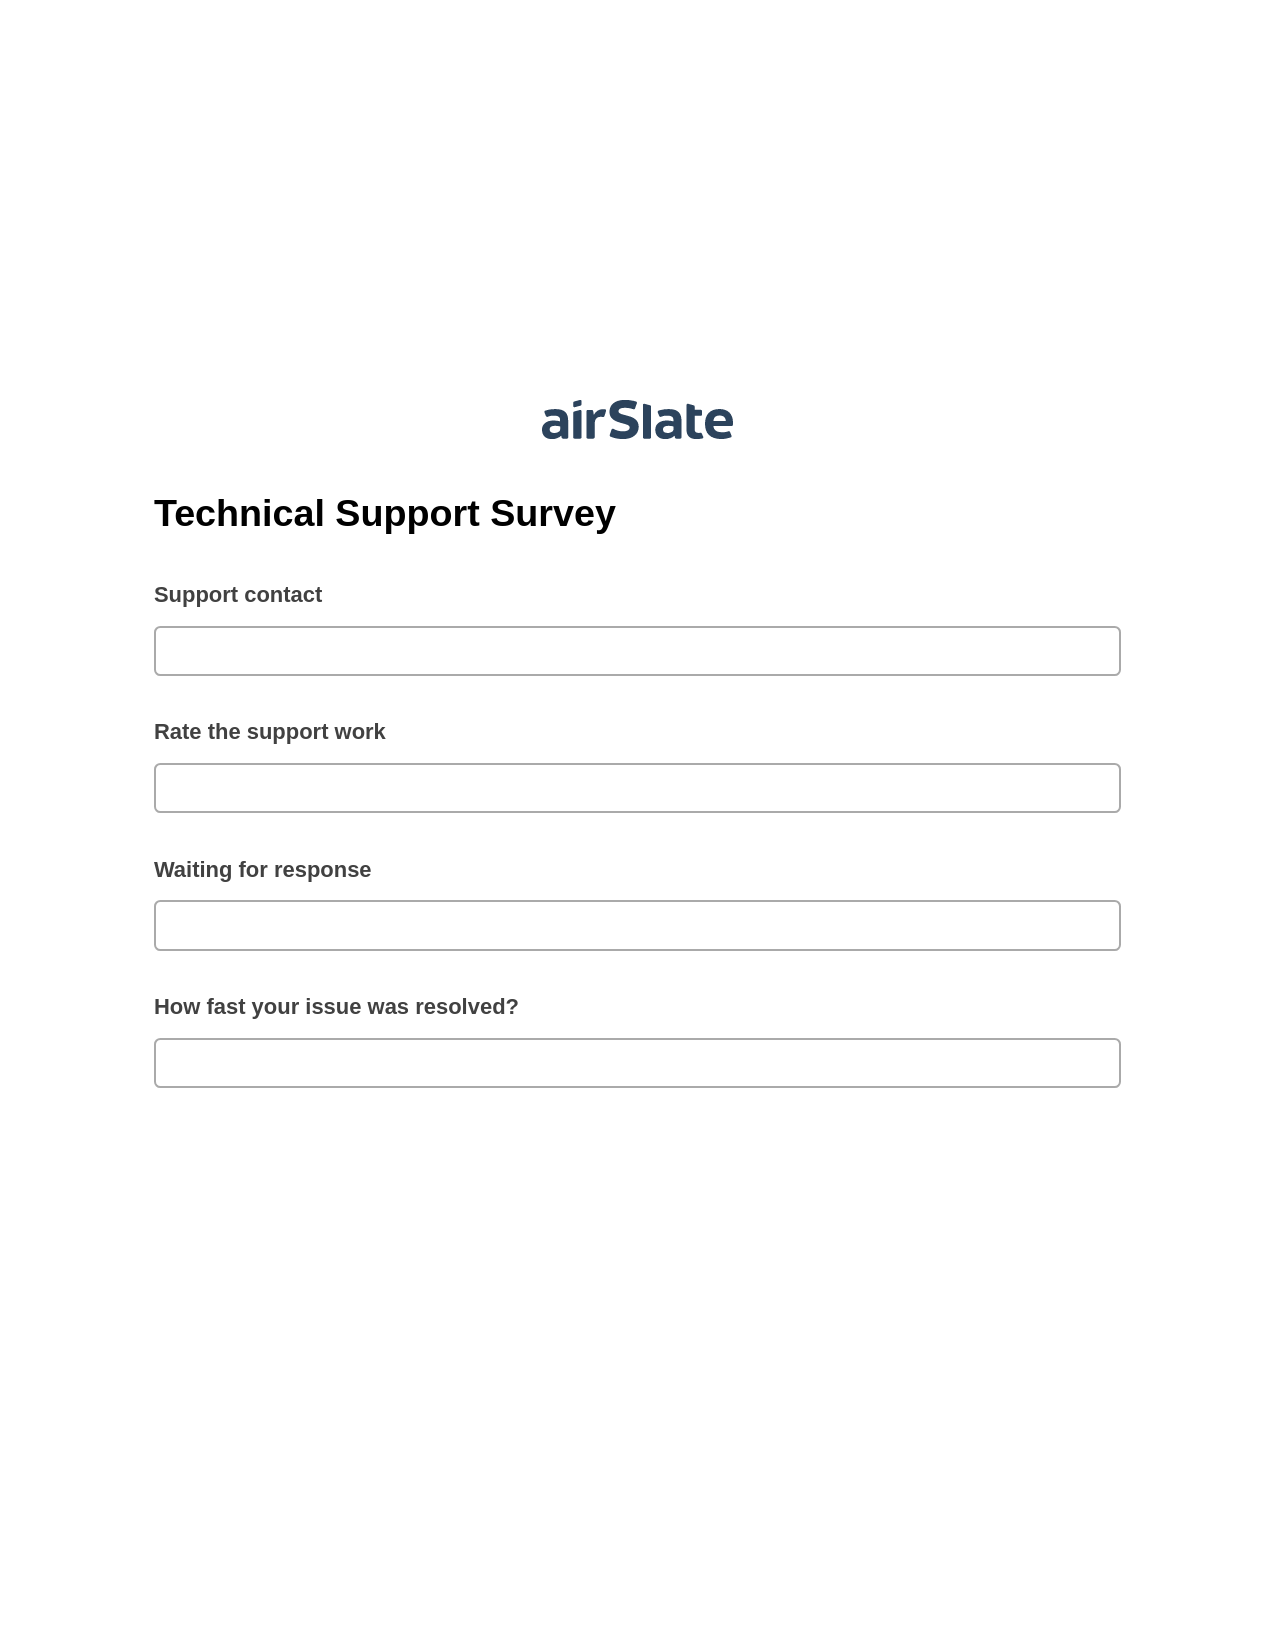 Technical Support Survey Pre-fill Dropdowns from Excel Bot, Update NetSuite Record Bot, Email Notification Postfinish Bot